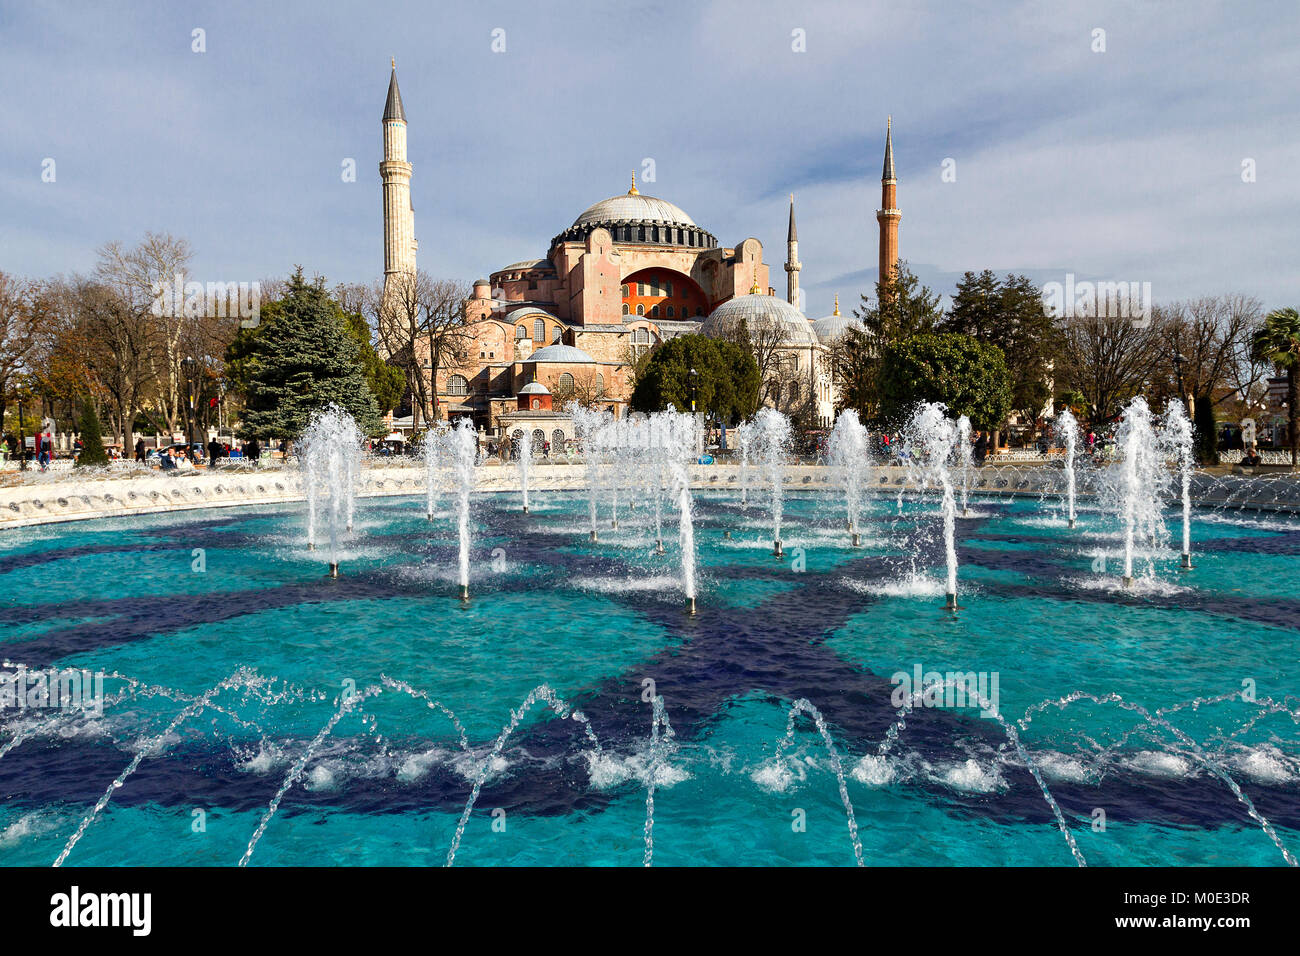 Park in Sultanahmet Square with the fountain and Hagia Sophia in the background, in Istanbul, Turkey Stock Photo